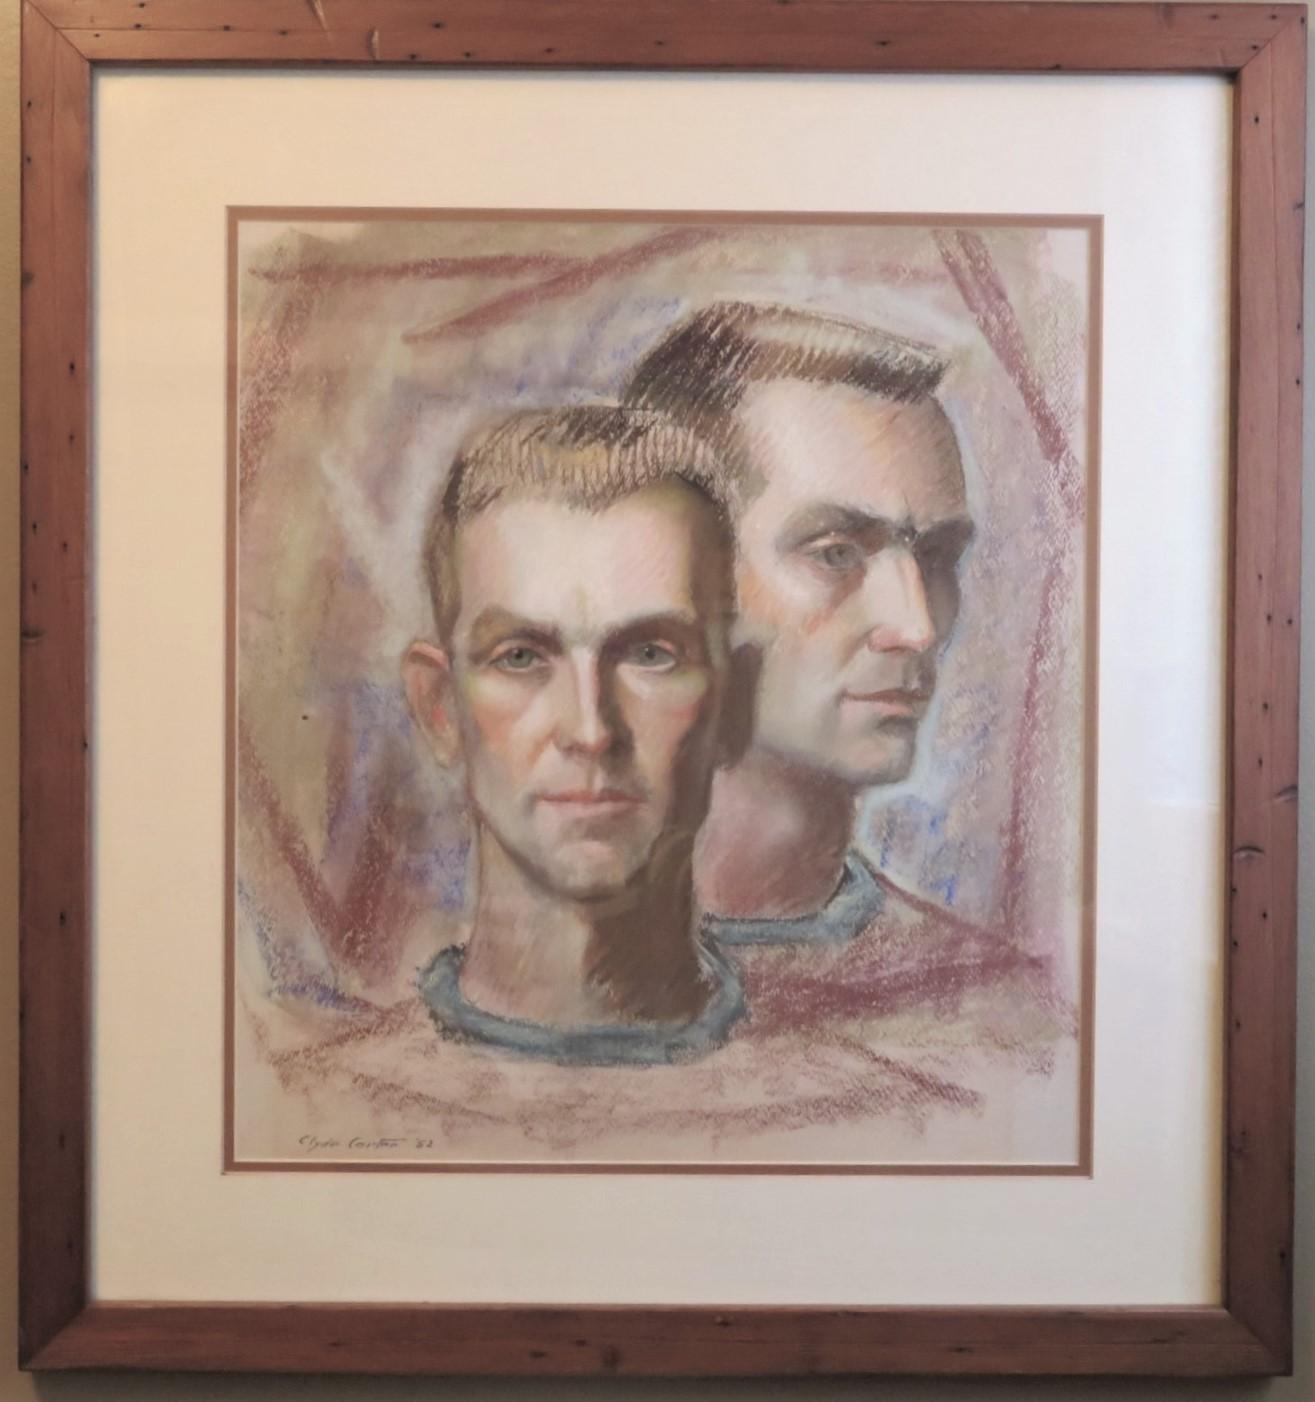 Signed Clyde Carter and dated '52, here you have a framed and double matted portrait of a young man featuring a side and front facial view.  Wonderful colors, done in crayon and pastels on paper.  Period flat top hair style and a crew neck shirt, a